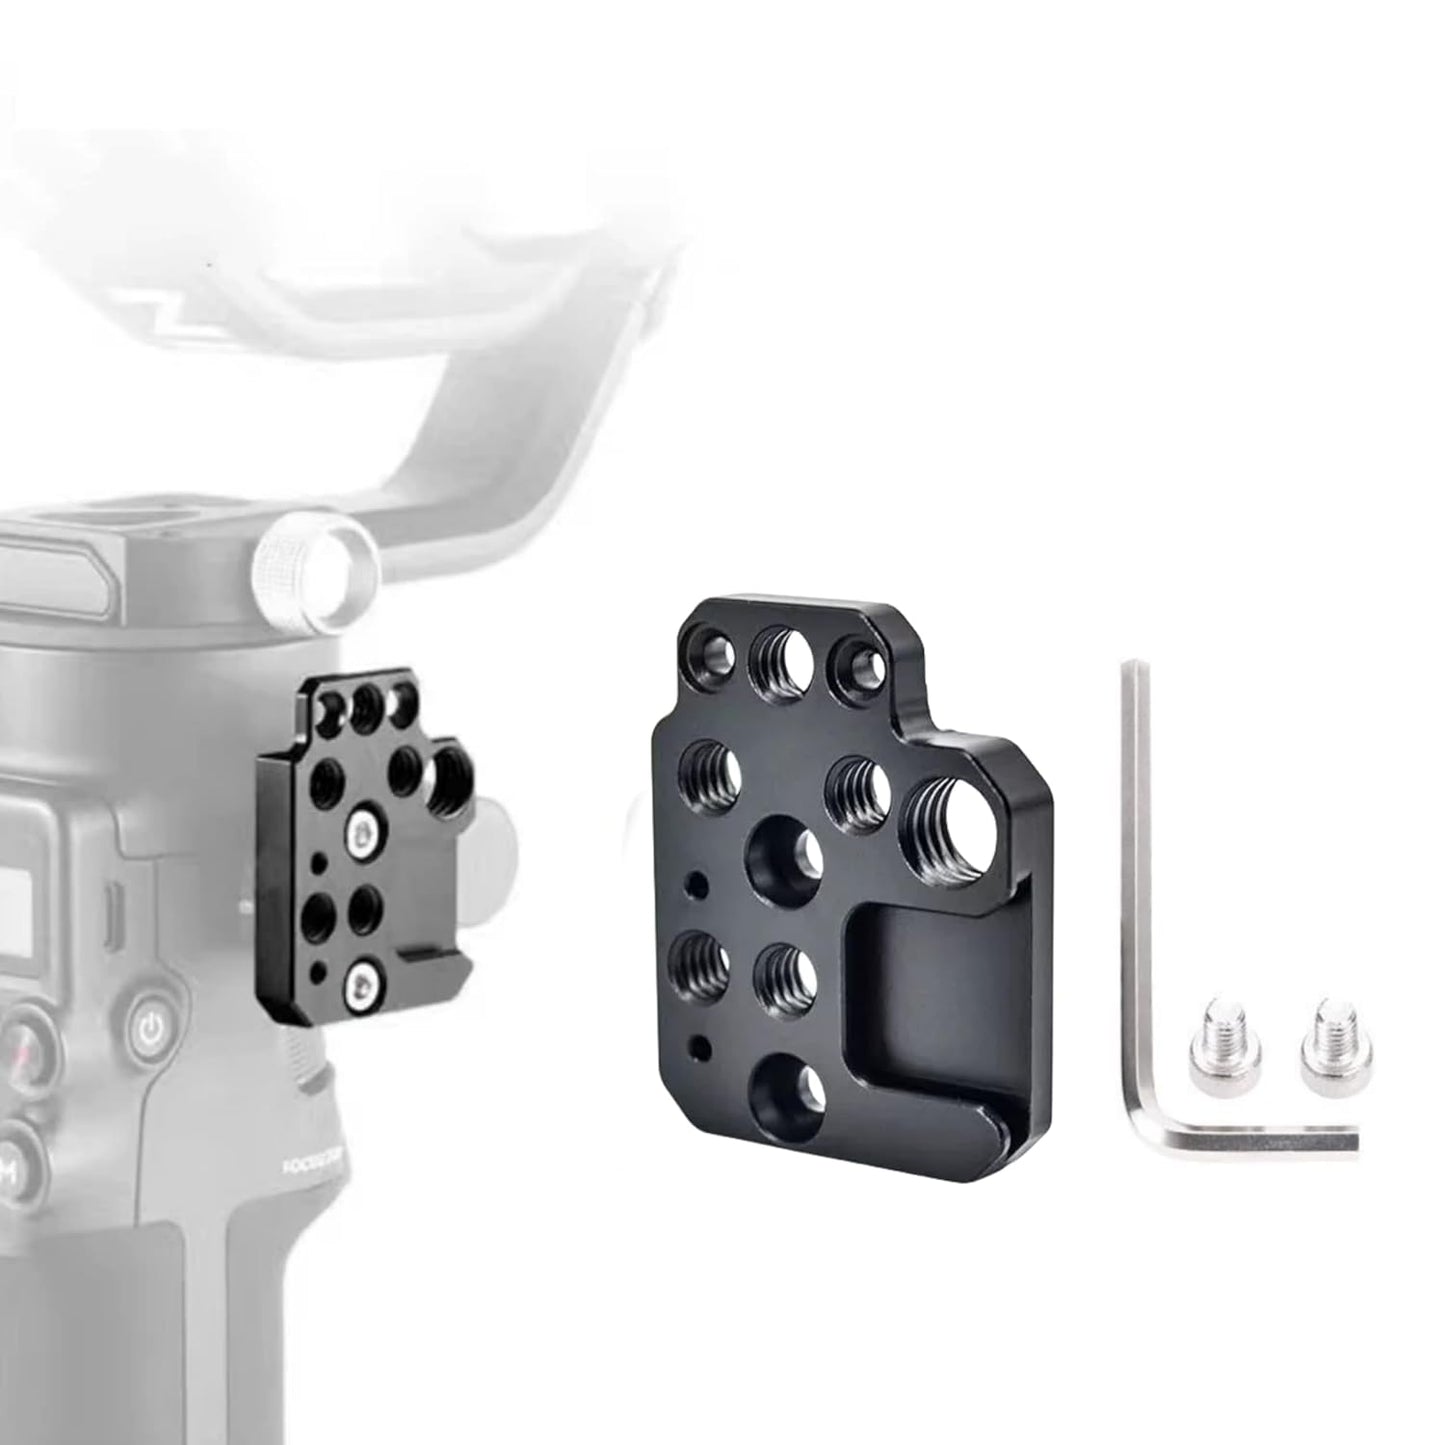 Expansion Mount Compatible with DJI Ronin RS4/ Pro, RS3/ Pro, RS2, RSC, RS 3 Mini Gimbal